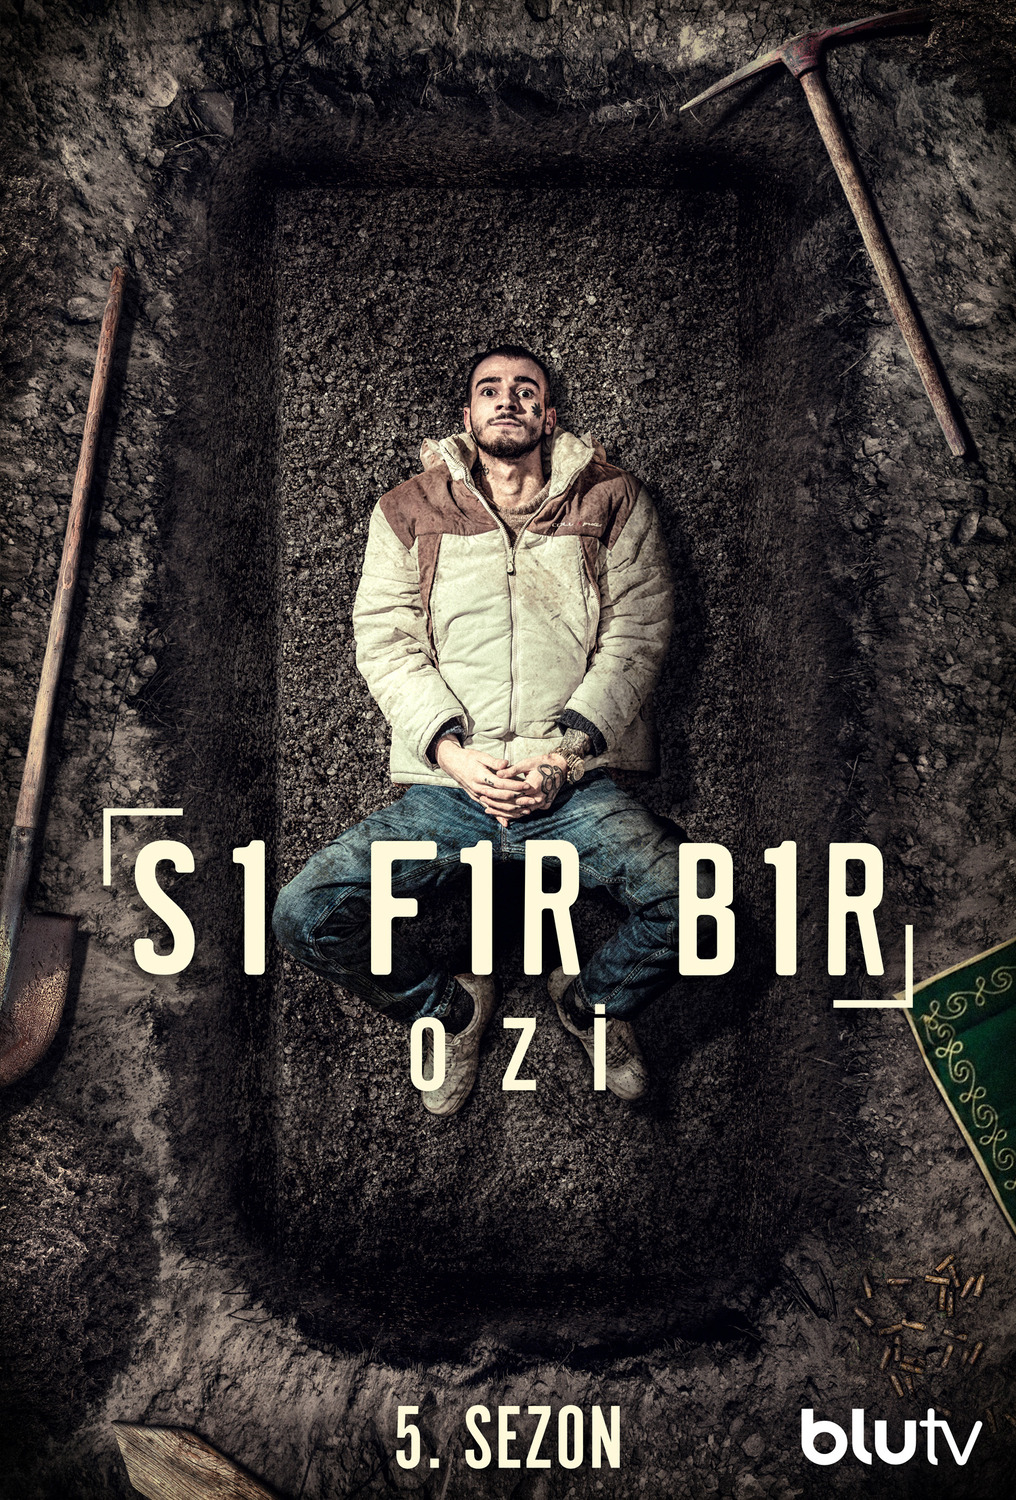 Extra Large TV Poster Image for Sifir Bir (#18 of 23)